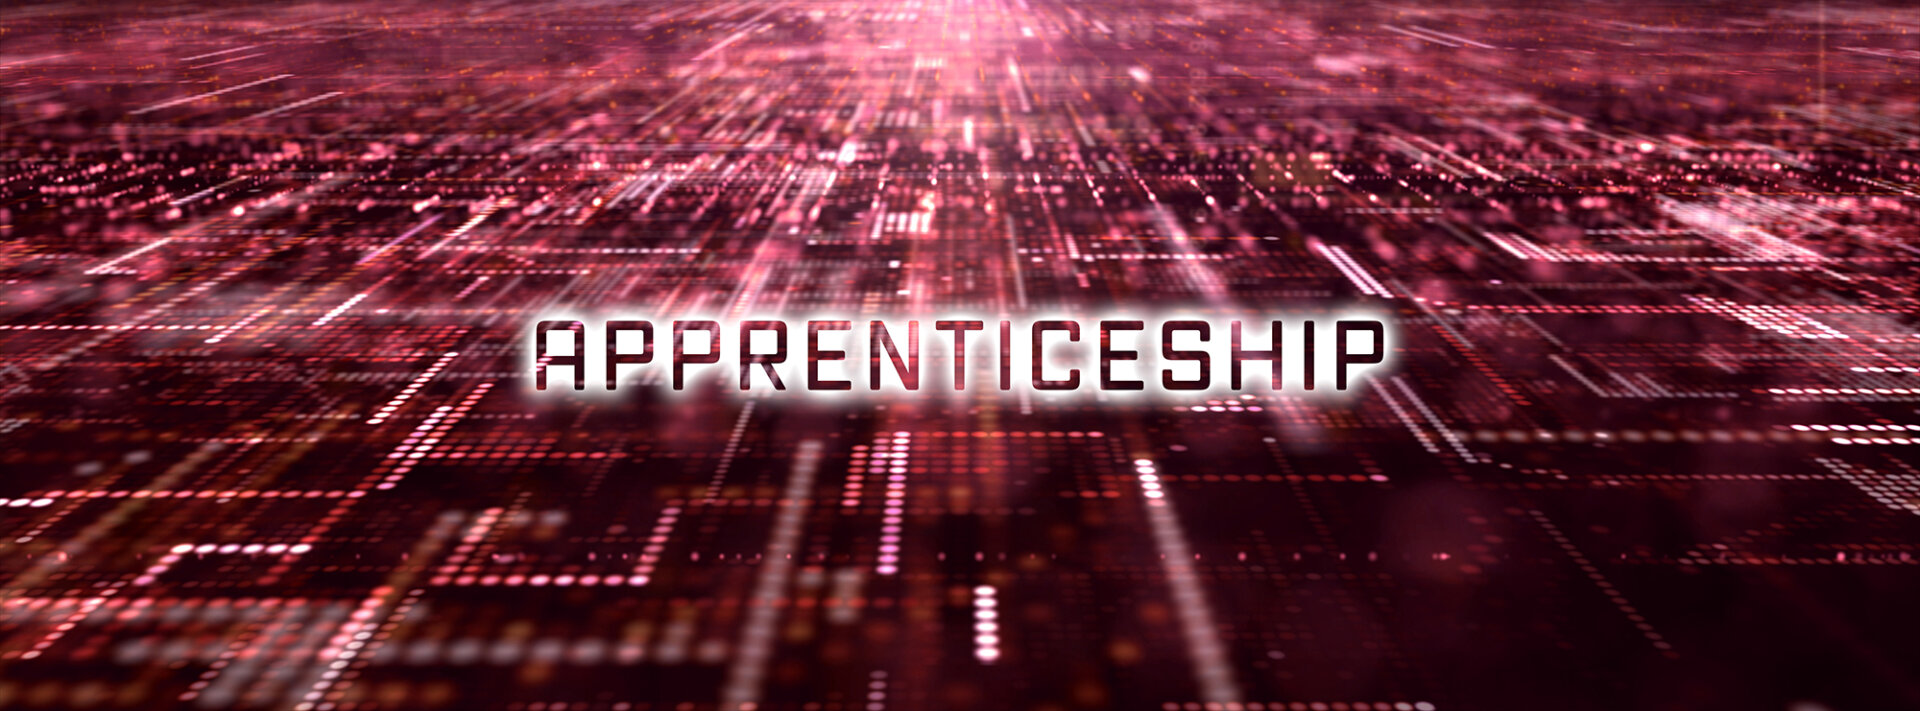 abstract technology apprenticeship